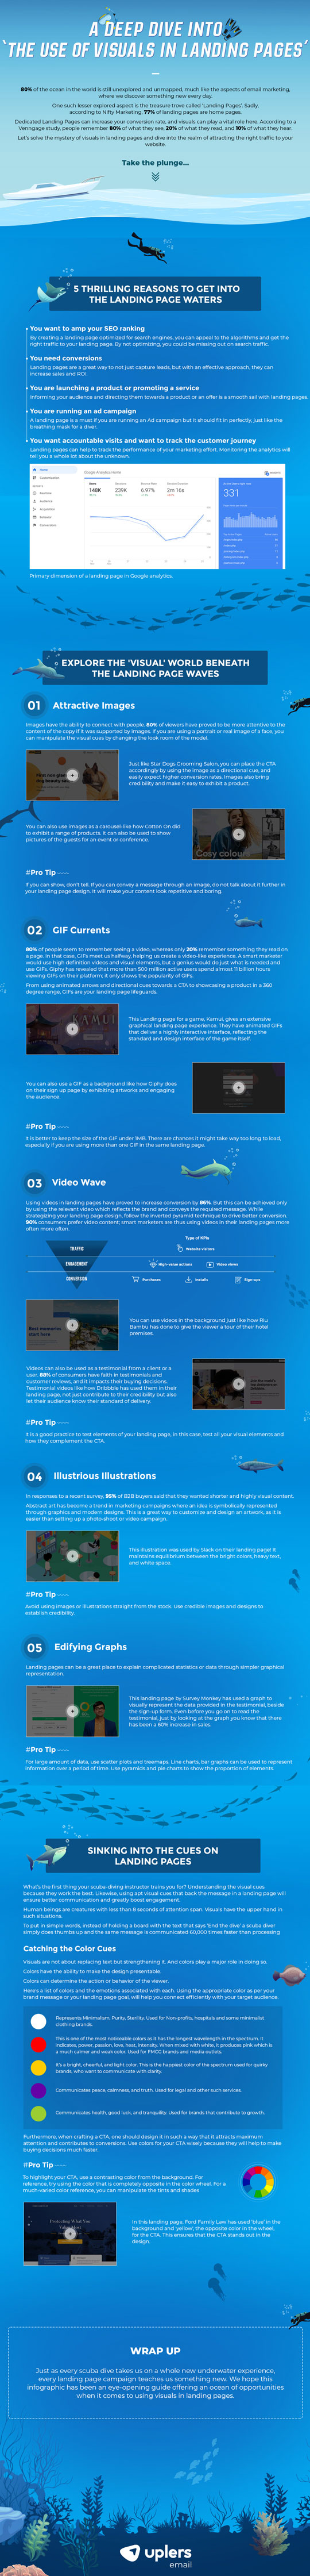 Visual Landing Pages Infographic by Uplers